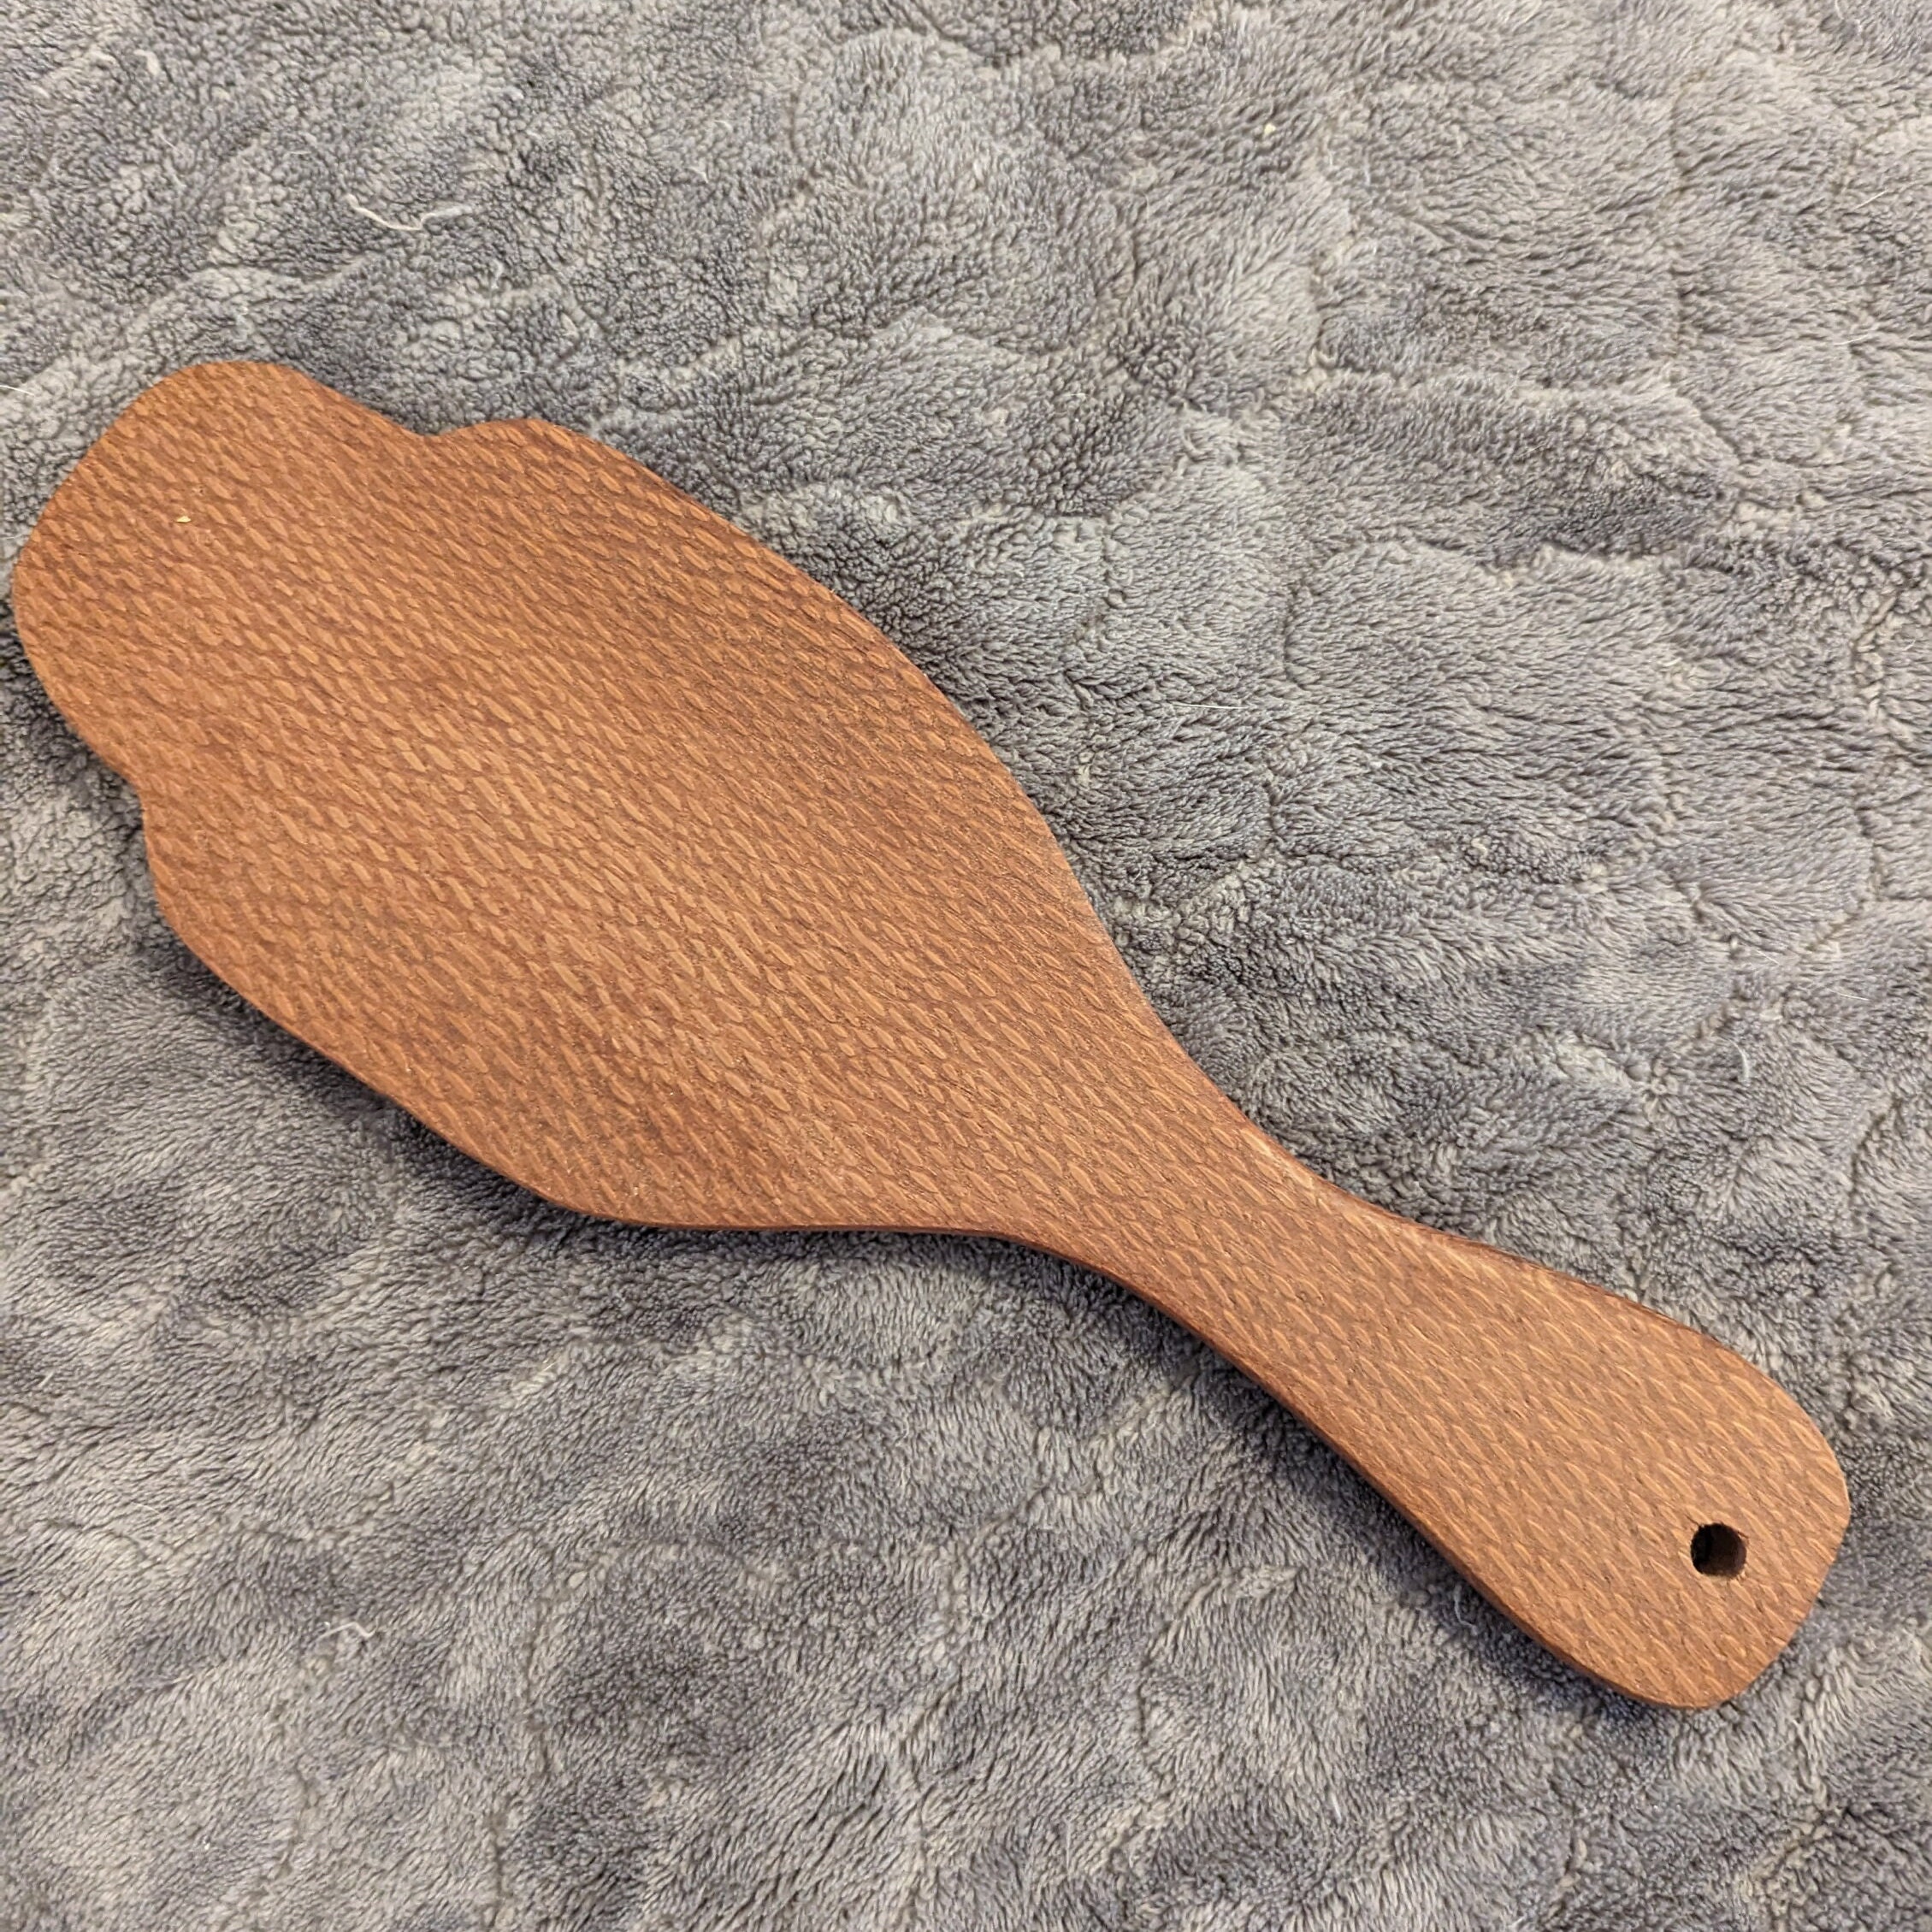 VENESUN 14inch Wood Spanking Paddle for Adults, Wooden Paddle with 5 Holes  for BDSM Sex Play